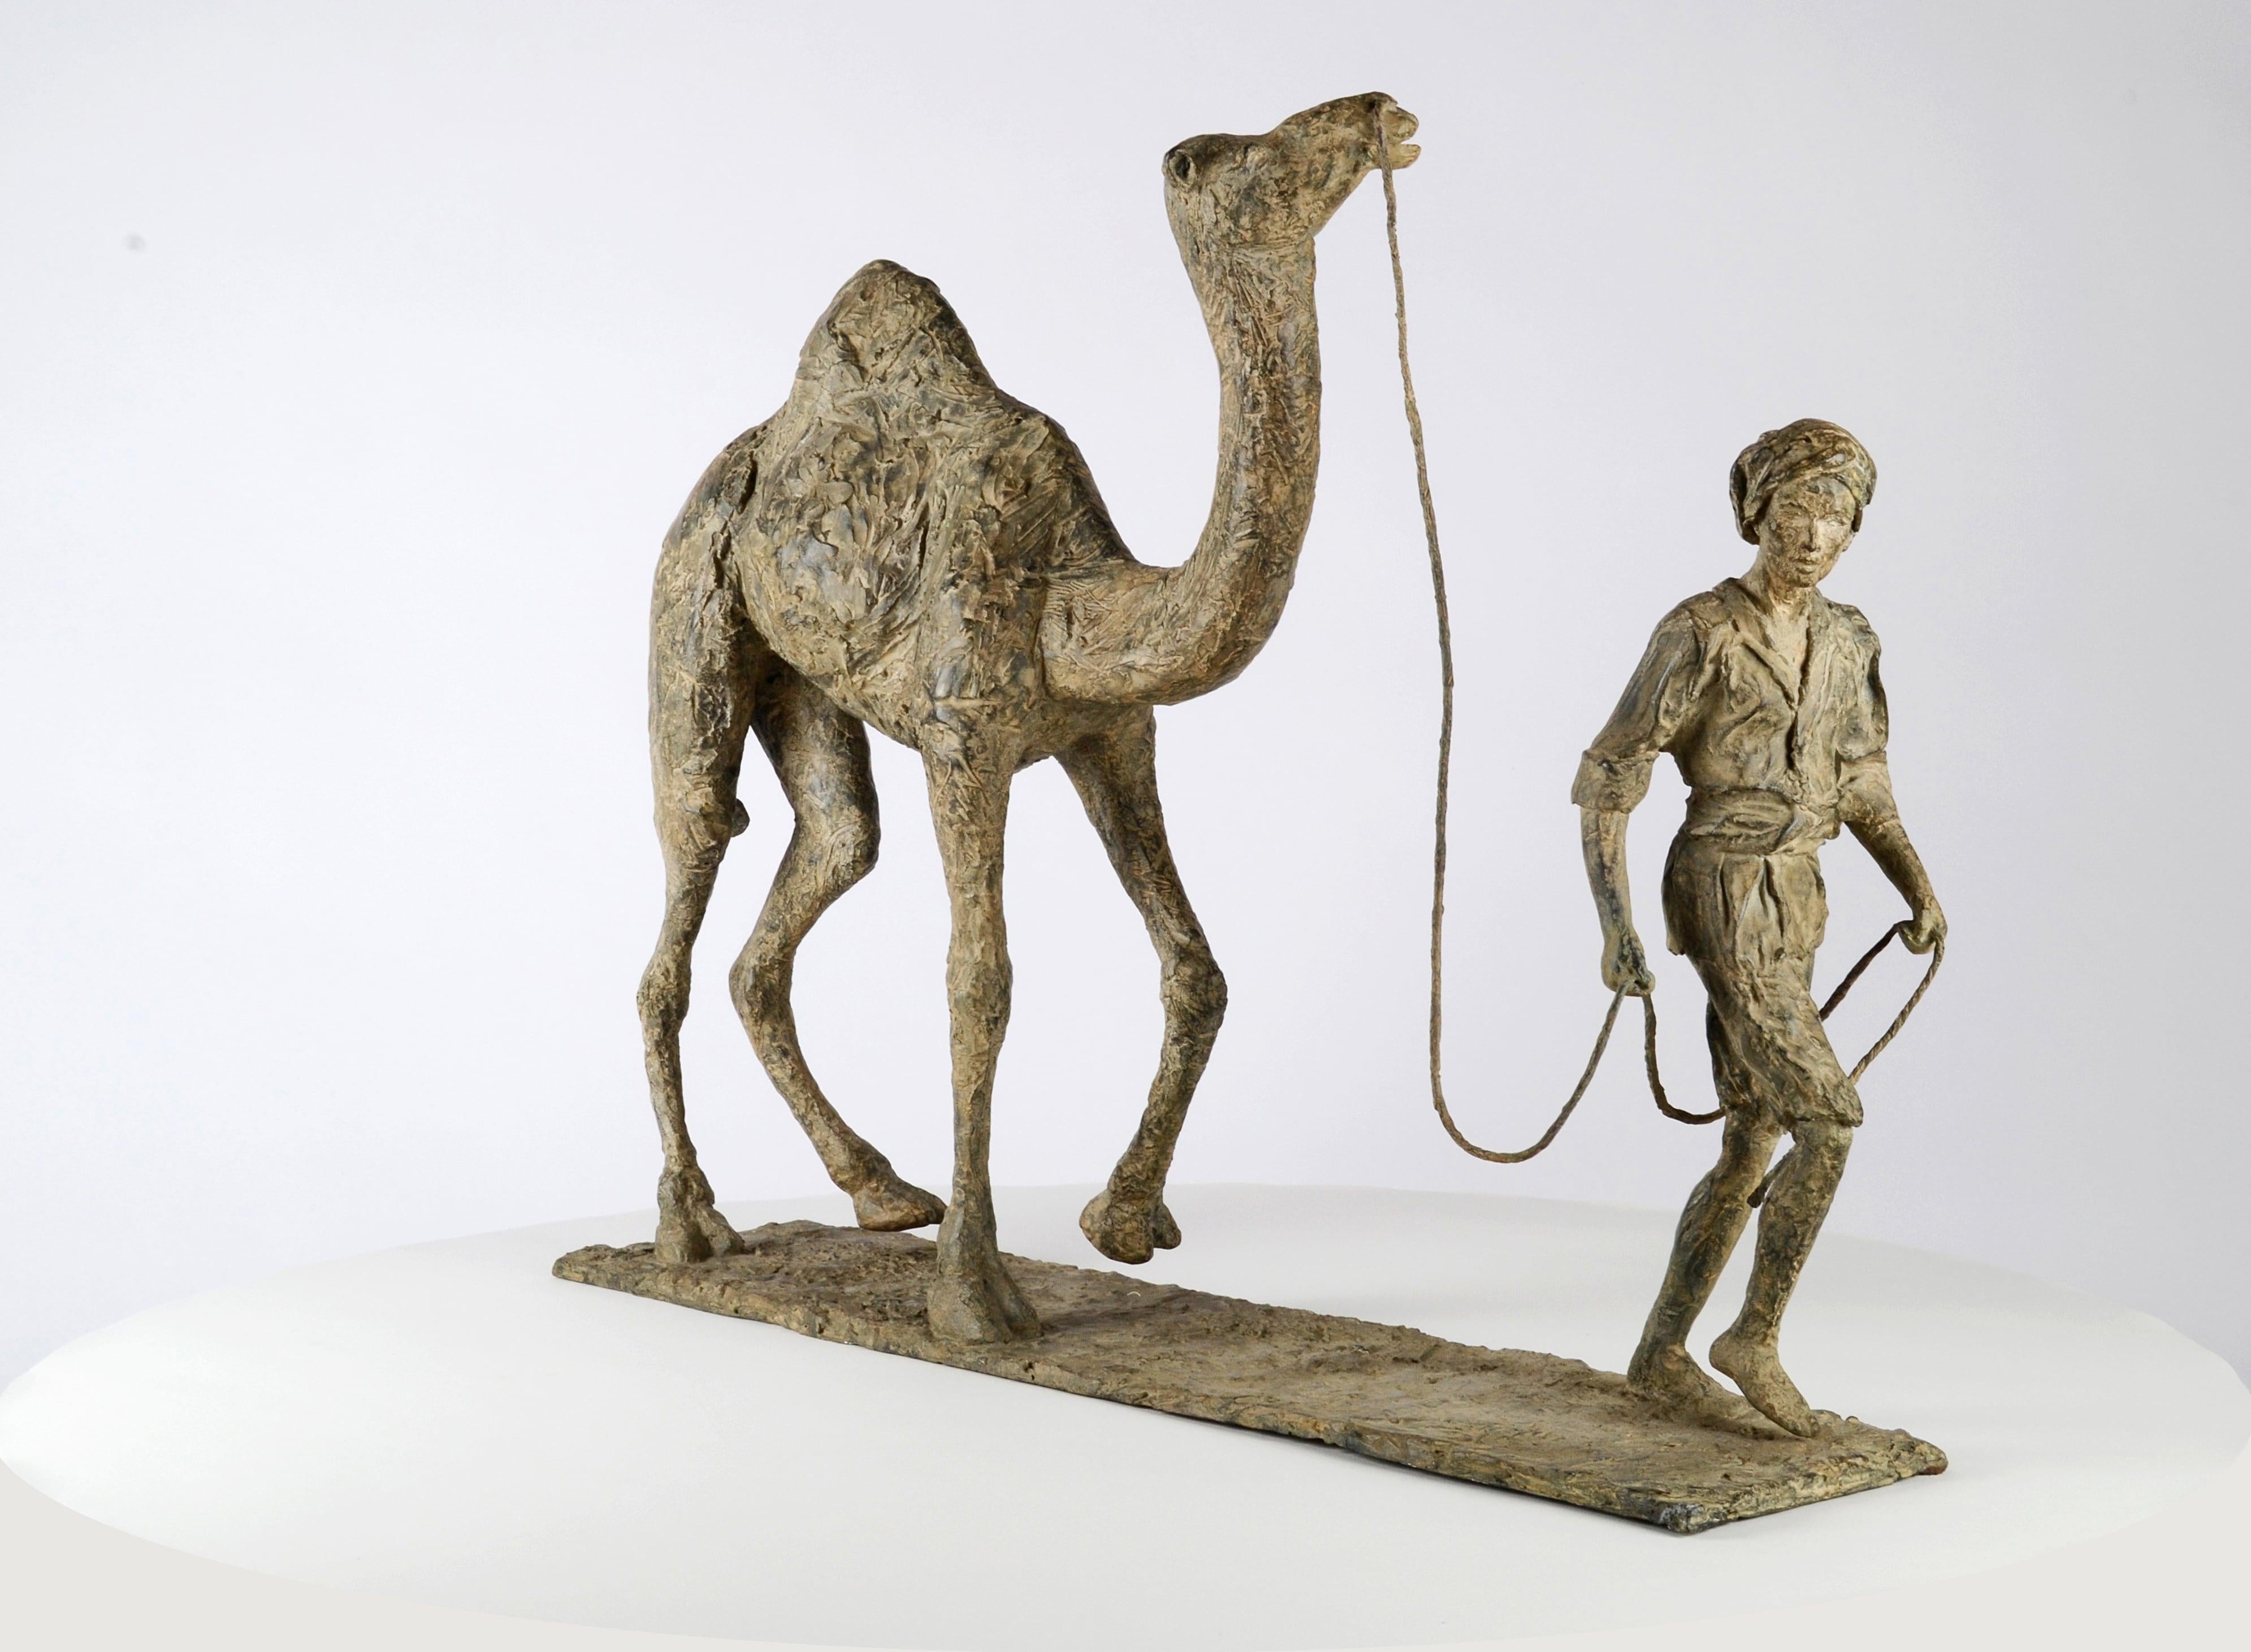 Au fil des sables is a bronze sculpture by contemporary artist Marine de Soos, dimensions are 56 × 75 × 17 cm (22 × 29.5 × 6.7 in). The sculpture is signed and numbered, it is part of a limited edition of 8 editions + 4 artist’s proofs, and comes